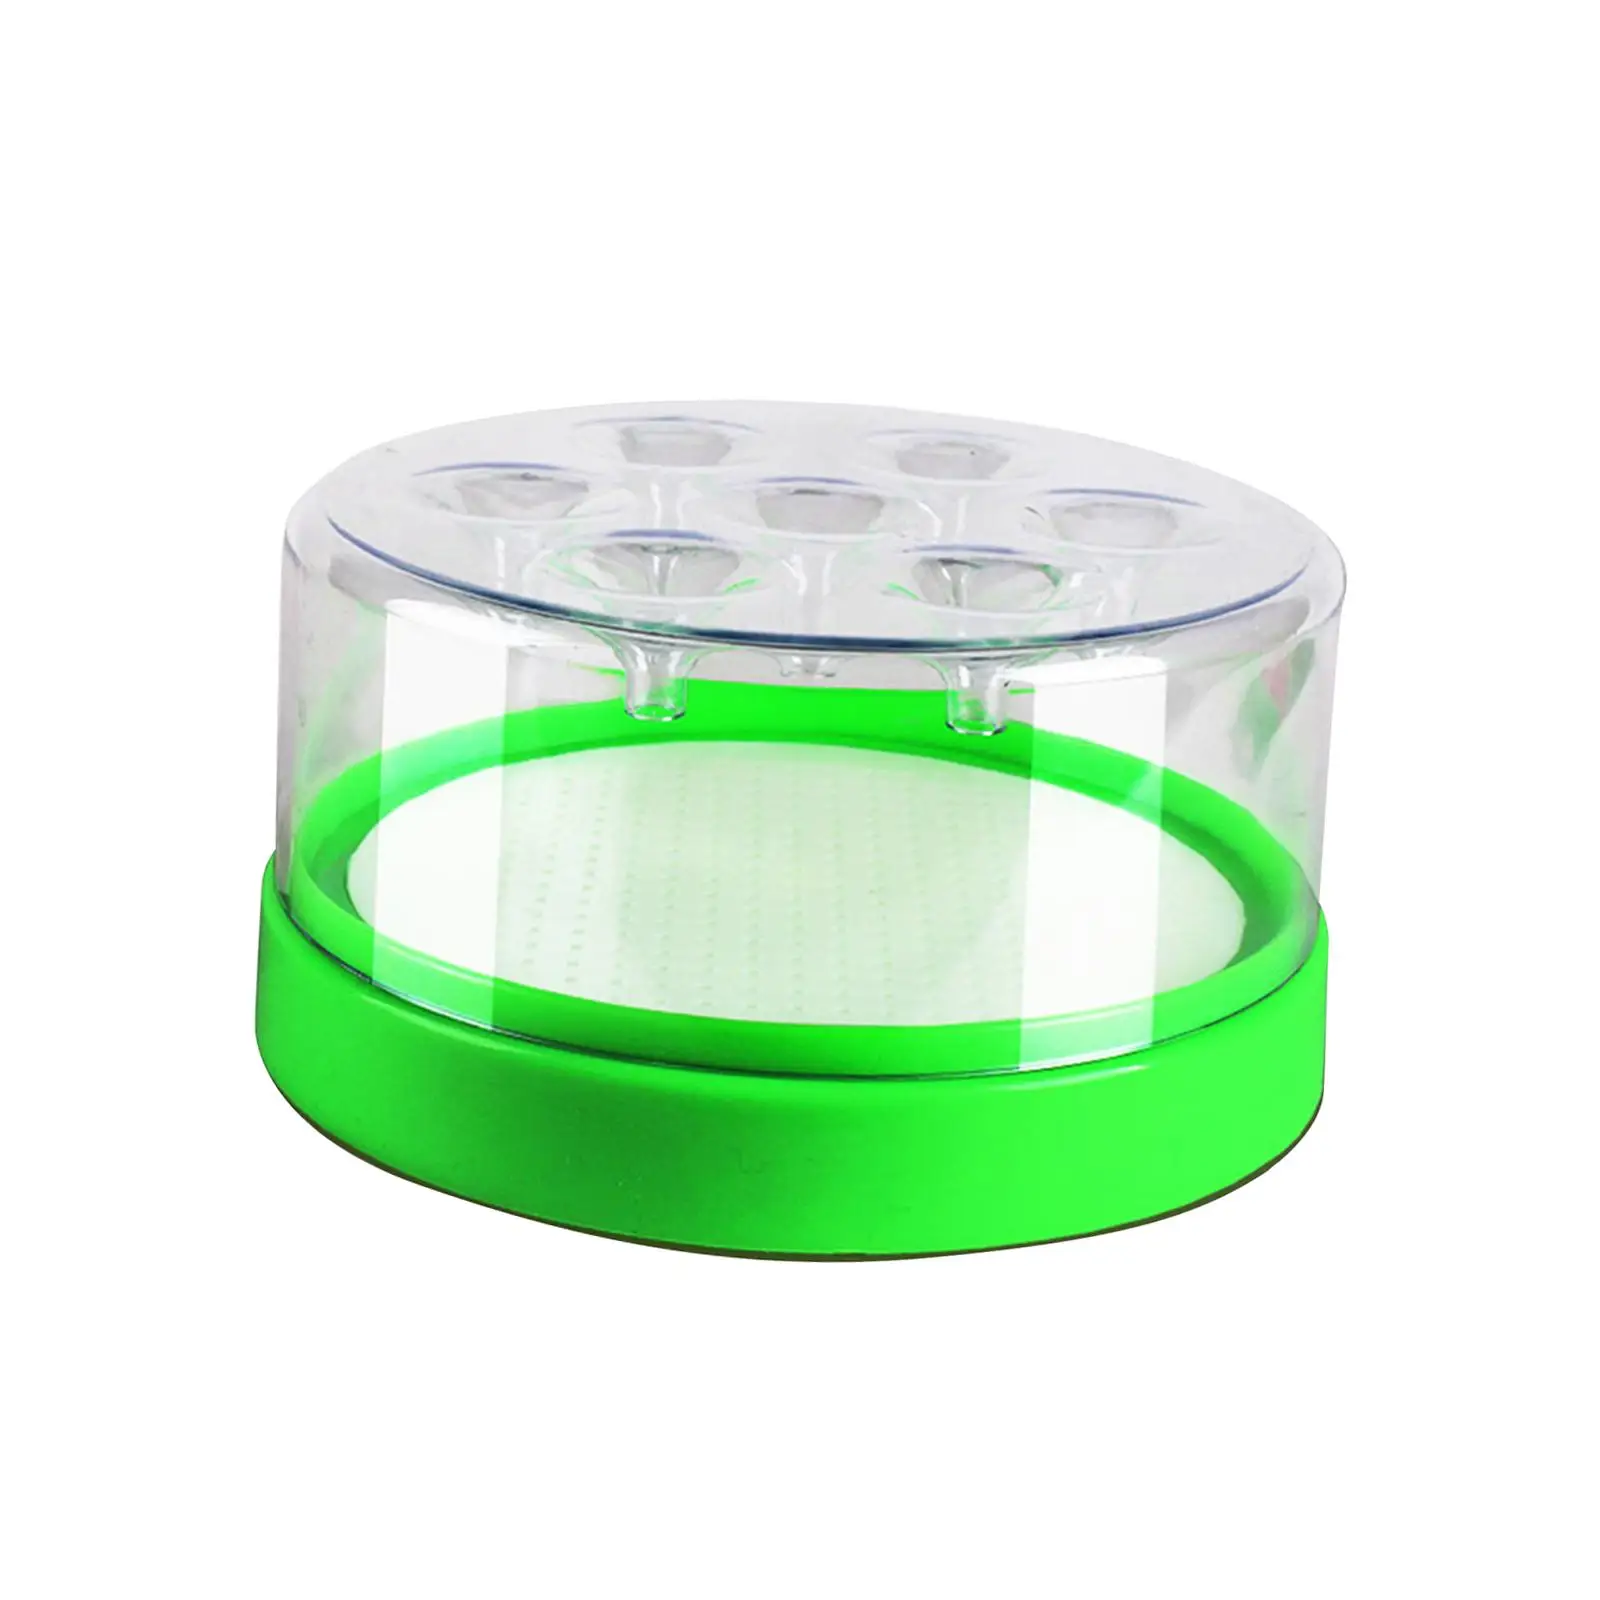 Fly Catching Cage Effective Clear Professional Fly Traps Fly Repellence for Park Hotel Indoor Outdoor Living Room Kitchen